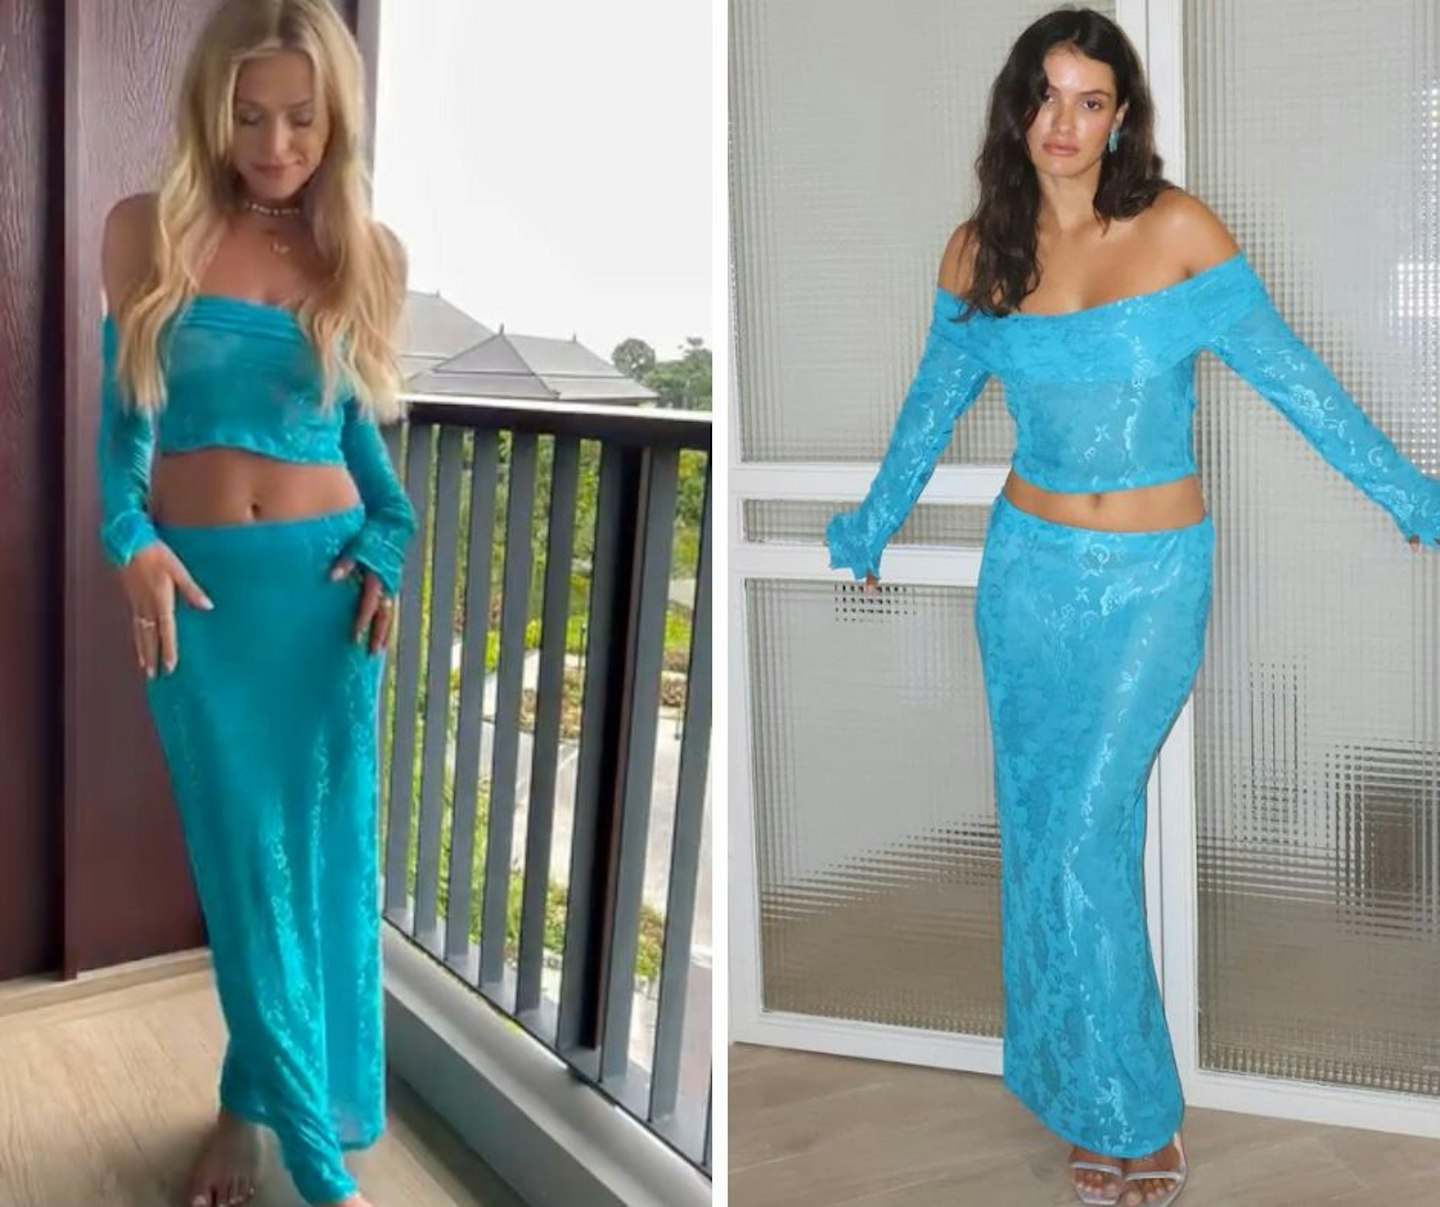 Chloe's Turquoise Co-Ord